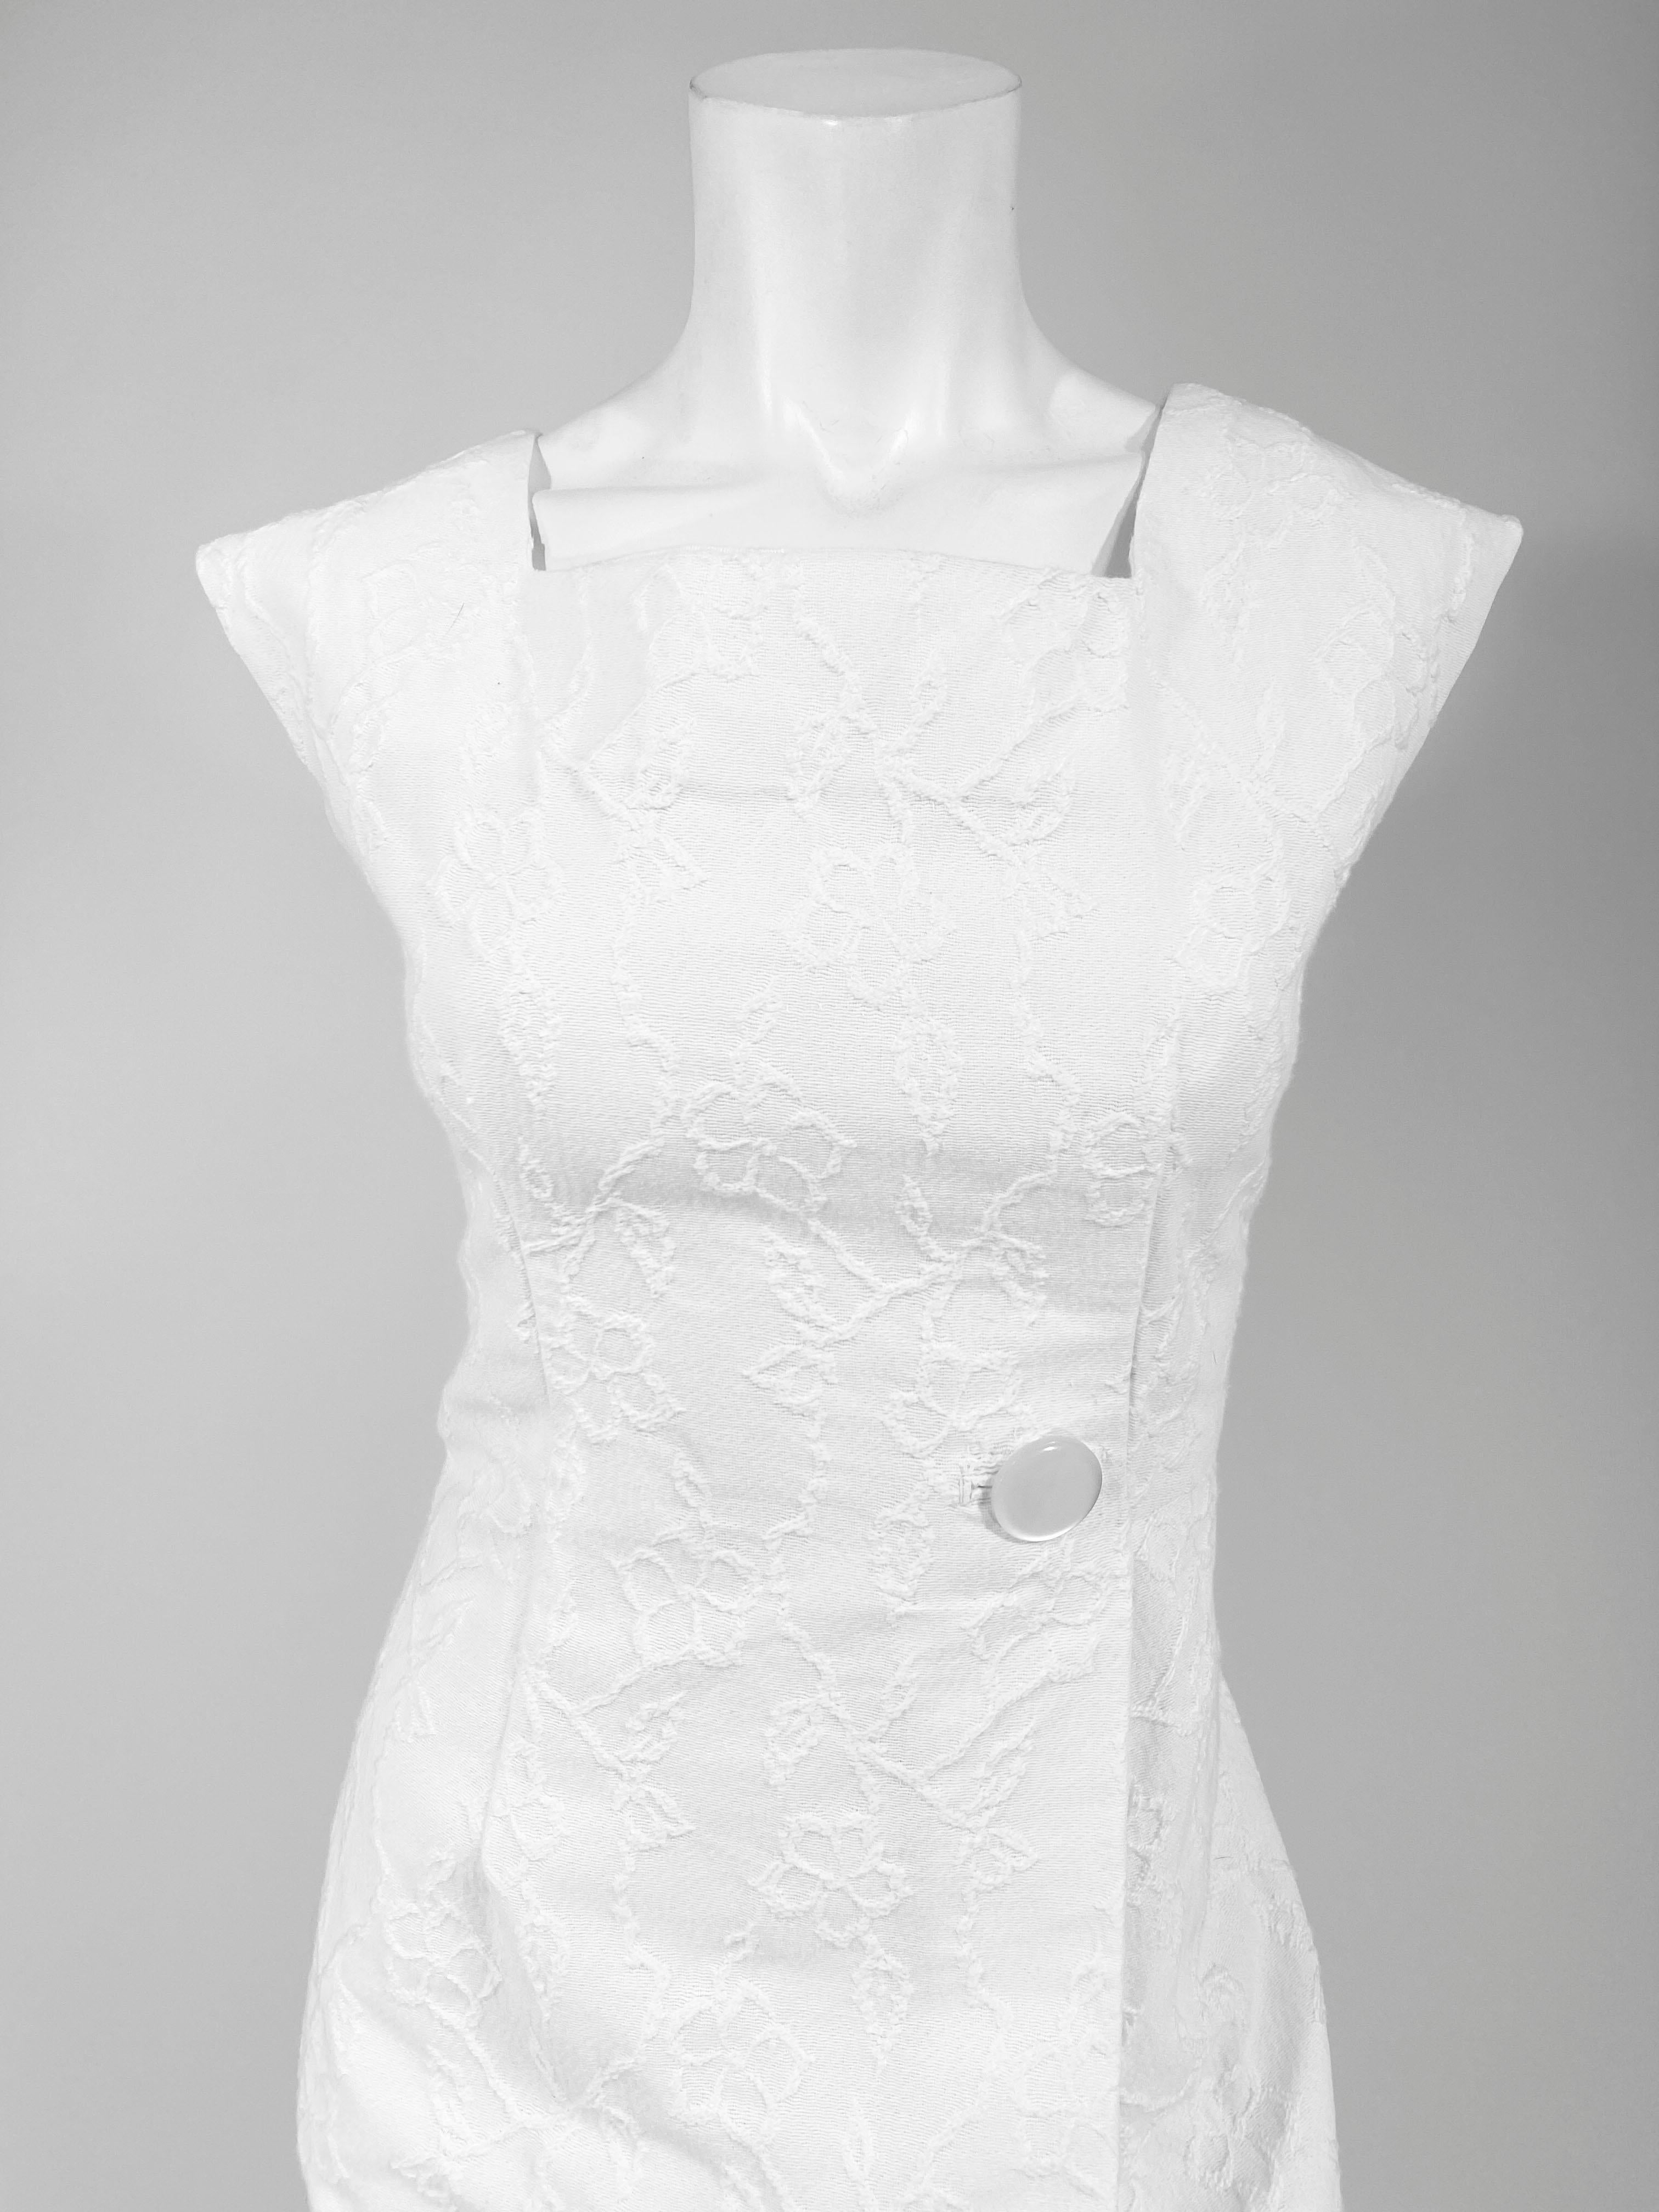 1960s white cotton jacquard summer cocktail dress. The skirt and bodice of the dress feature a large single pleat to place of a rear kick pleat, decorated with a large mother of pear finished button. The silouette of the dress has cut in arm holes,